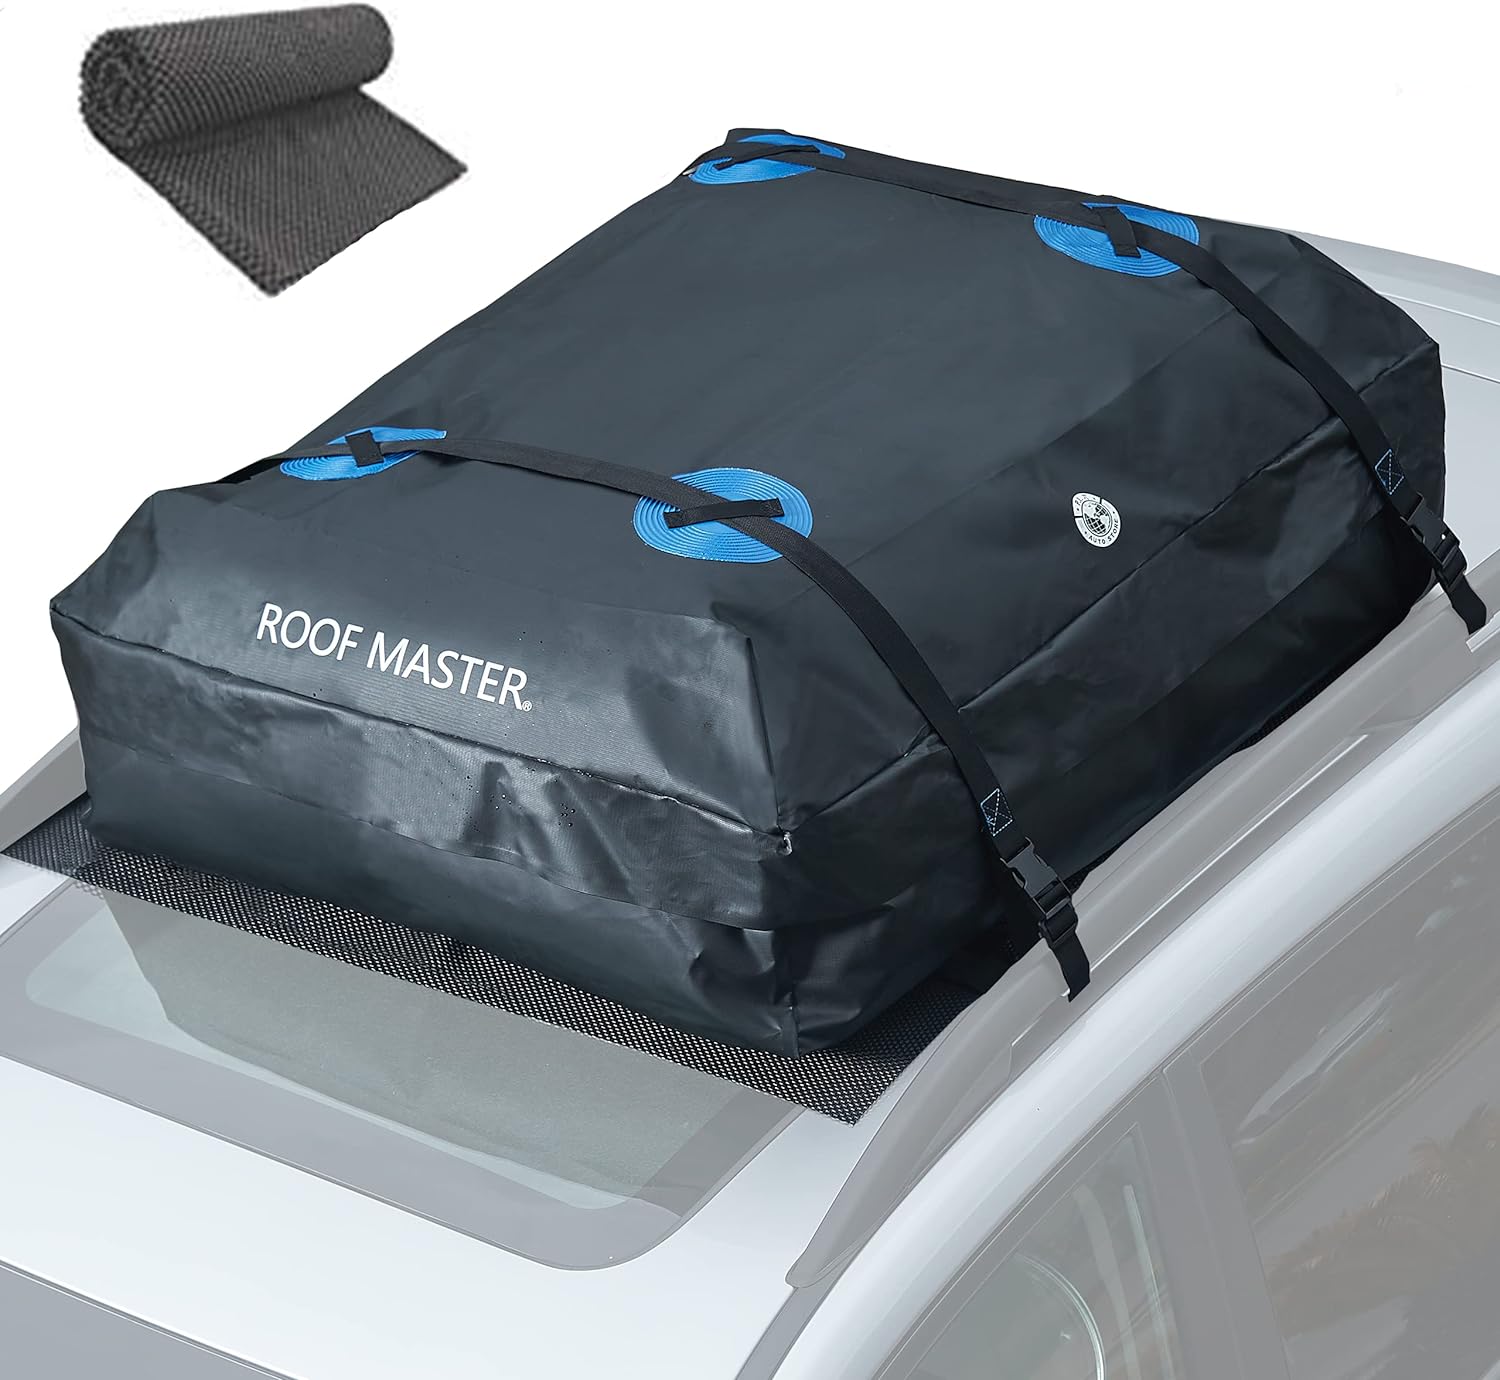 This is my very first purchase of a cargo bag or any kind or cargo roof carrier. I've looked at cargo boxes vs cargo bags. I went with the bag due to the ease of set up, removal and stow away.I ordered the 16 Cubit Feet for our 2018 ford explorer. it was exactly what we needed. The product itself was great. It is exactly what they advertise. I was very happy with it. It is strong and definitely waterproof. Great quality materials and easy to fold after use.We drove over 1,000 miles this summer a